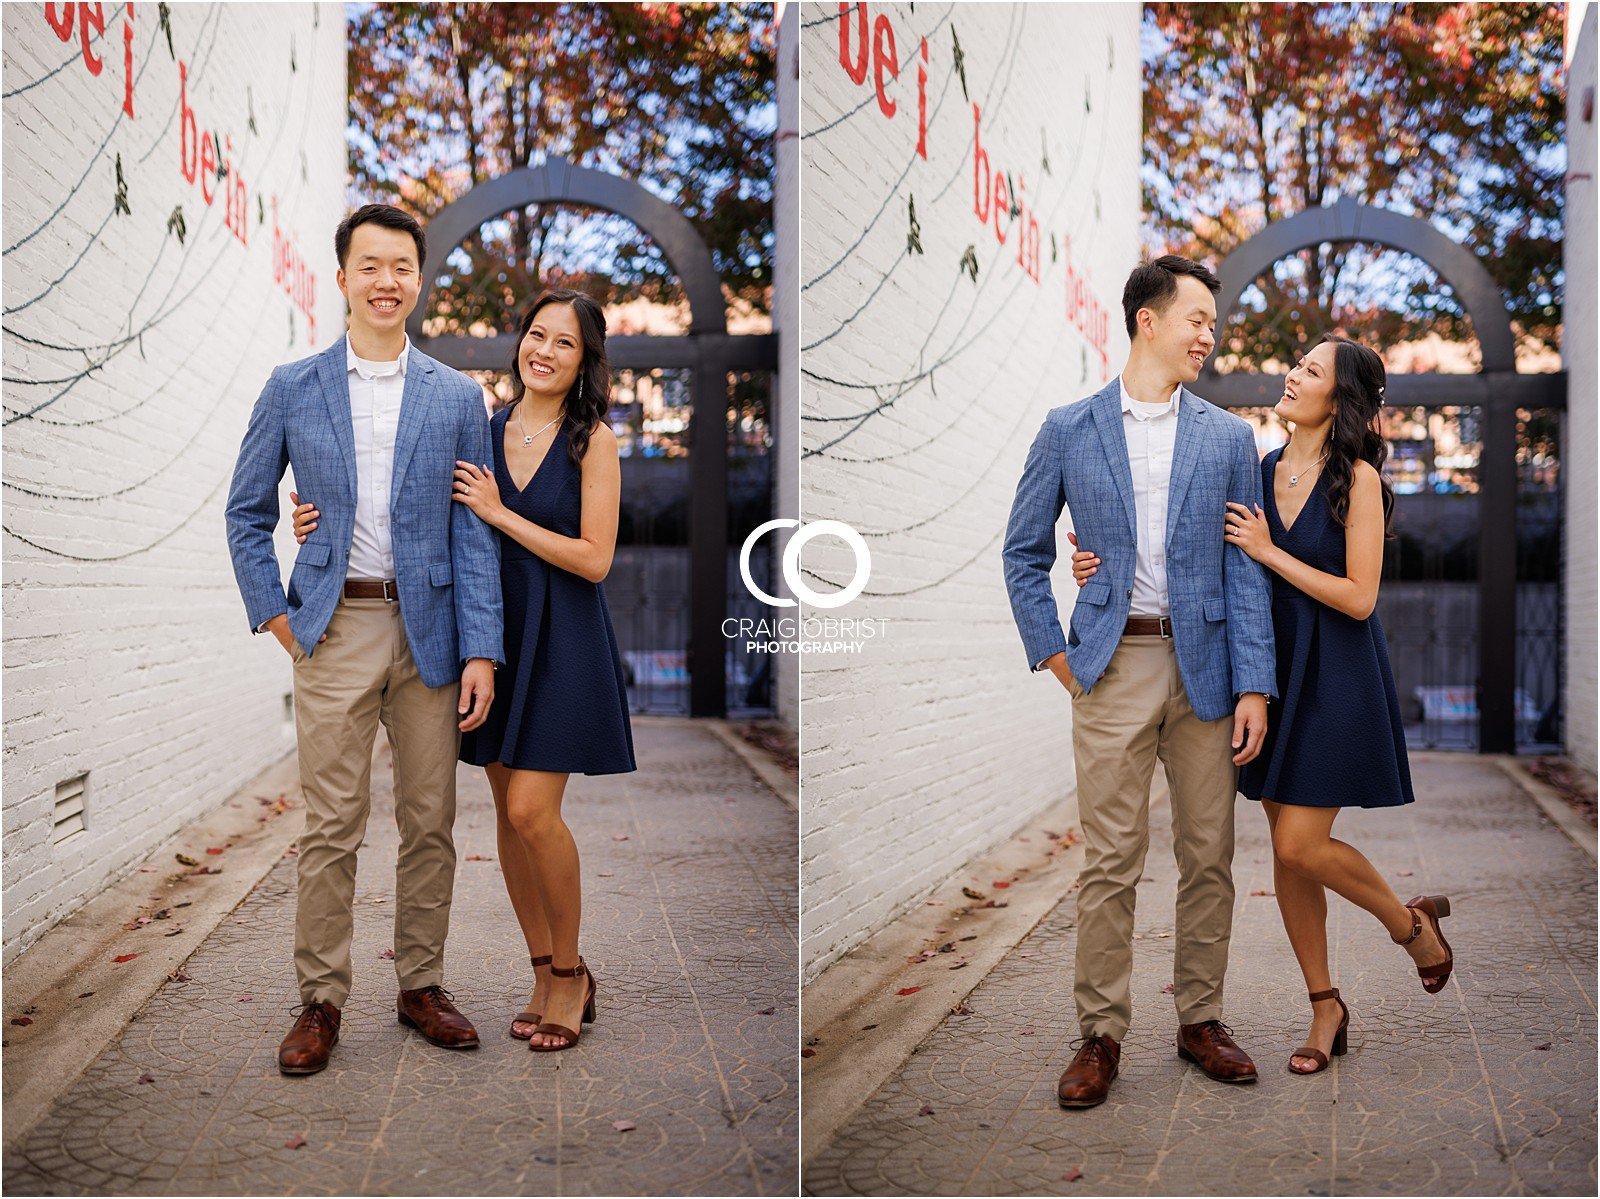 Decatur Downtown Stone Mountain Top Georgia Fall Engagement Portraits_0008.jpg